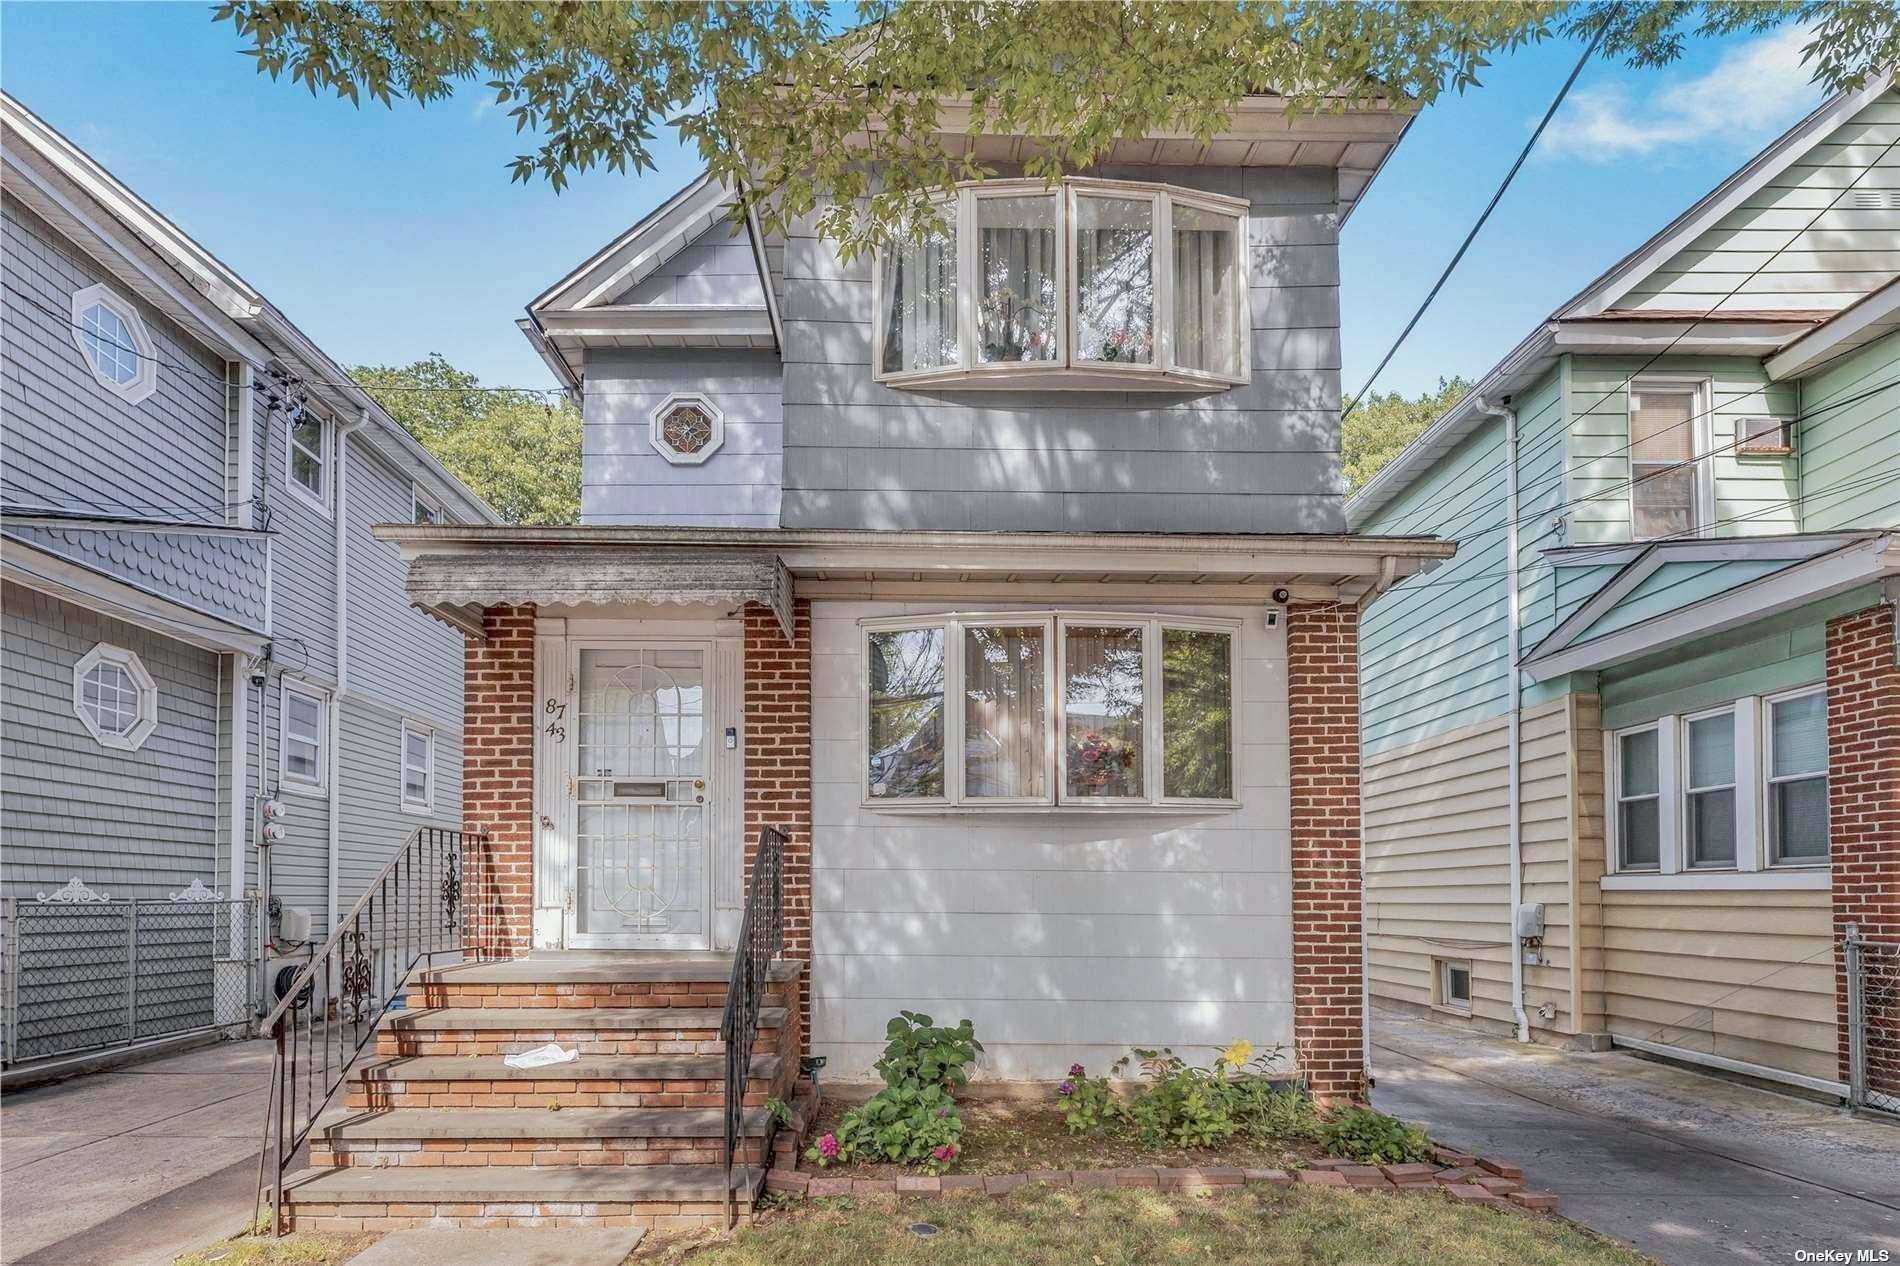 Woodhaven Legal 2 Family Property featuring 6 bedrooms, 3 full bathrooms, a formal dining room, a formal living room, an eat in kitchen, and a fully finished basement with a ...